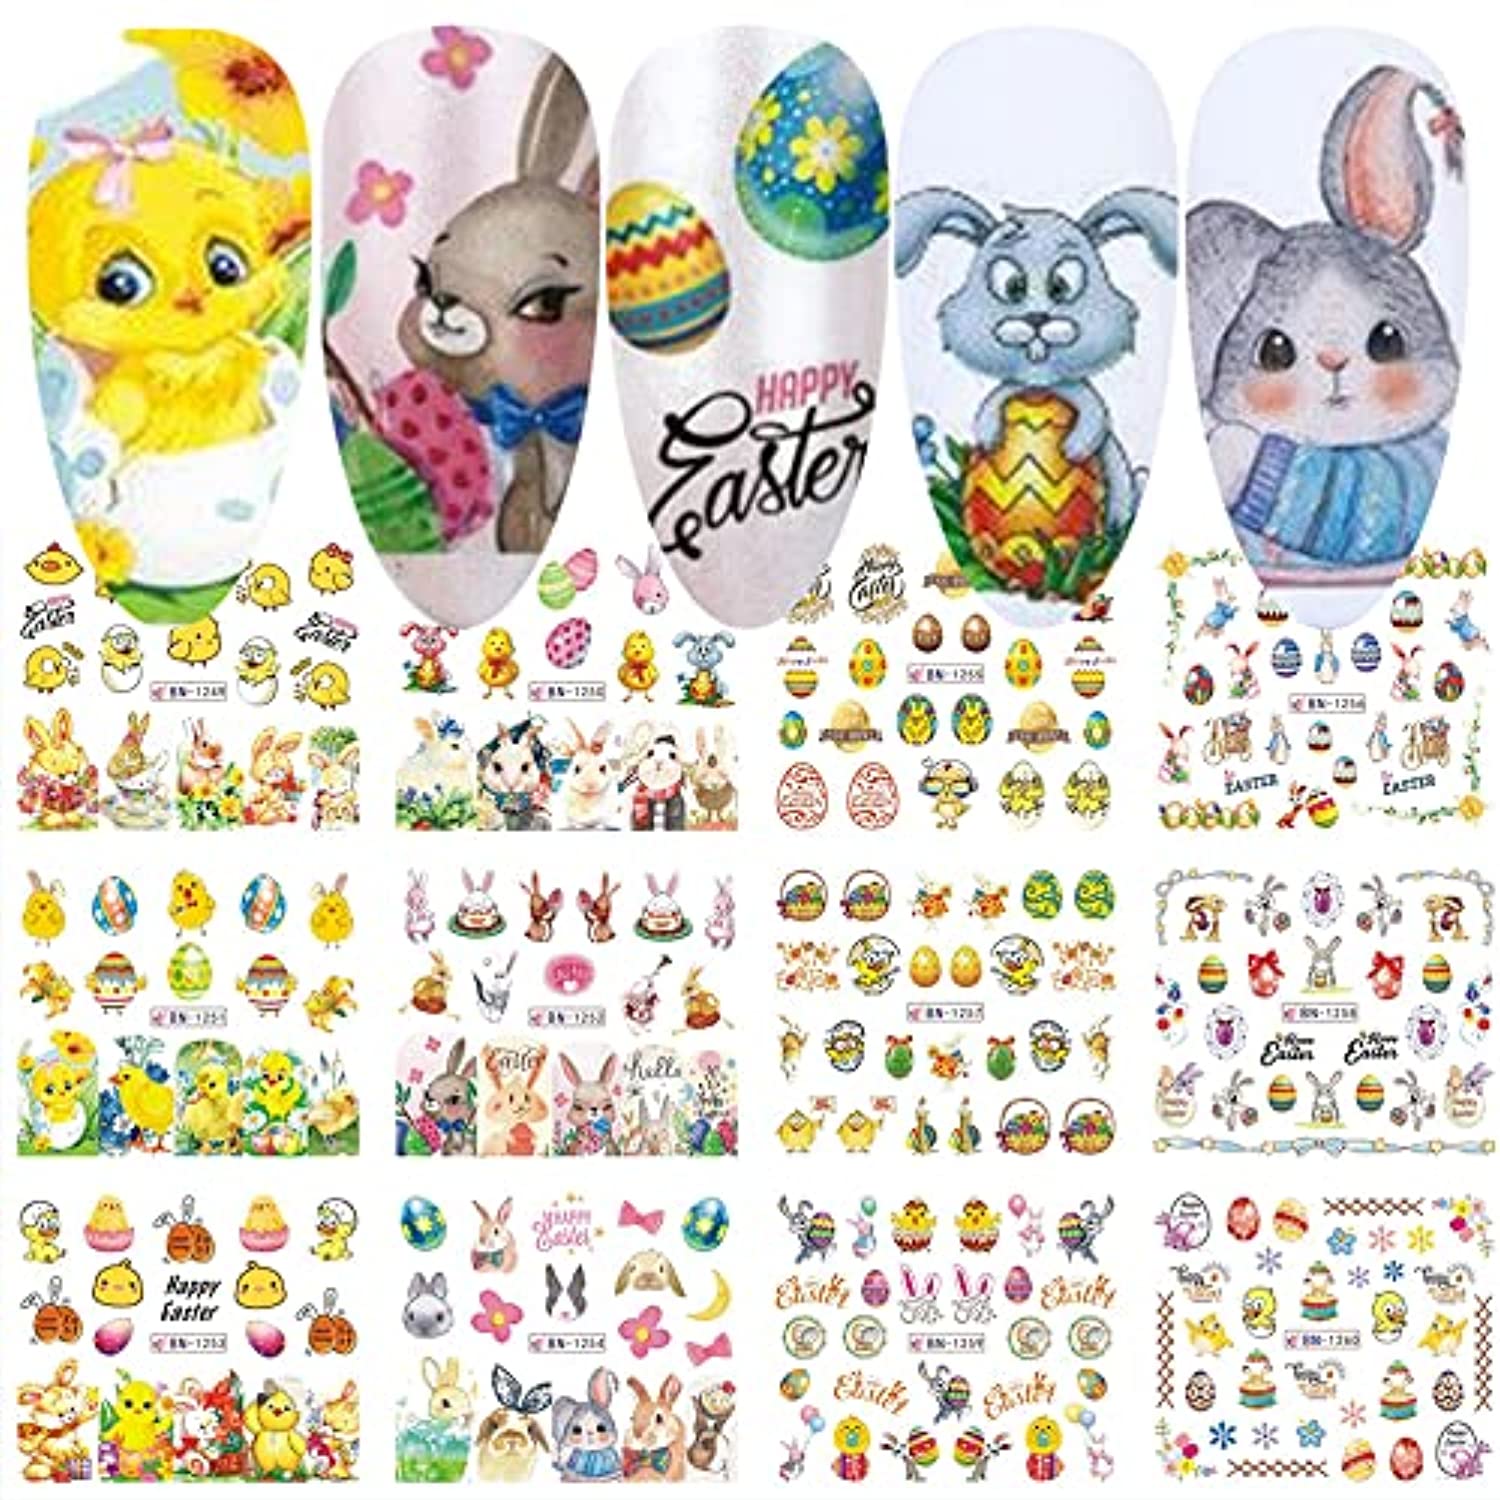 12 Sheet Easter Nail Art Stickers Bunny Eggs Nail Decal Nail Art Supplies Bunny Eggs Chick Rabbits Flower Nail Design Jesus Christ Easter Nail Decoration for Women Girls Manicure Decor